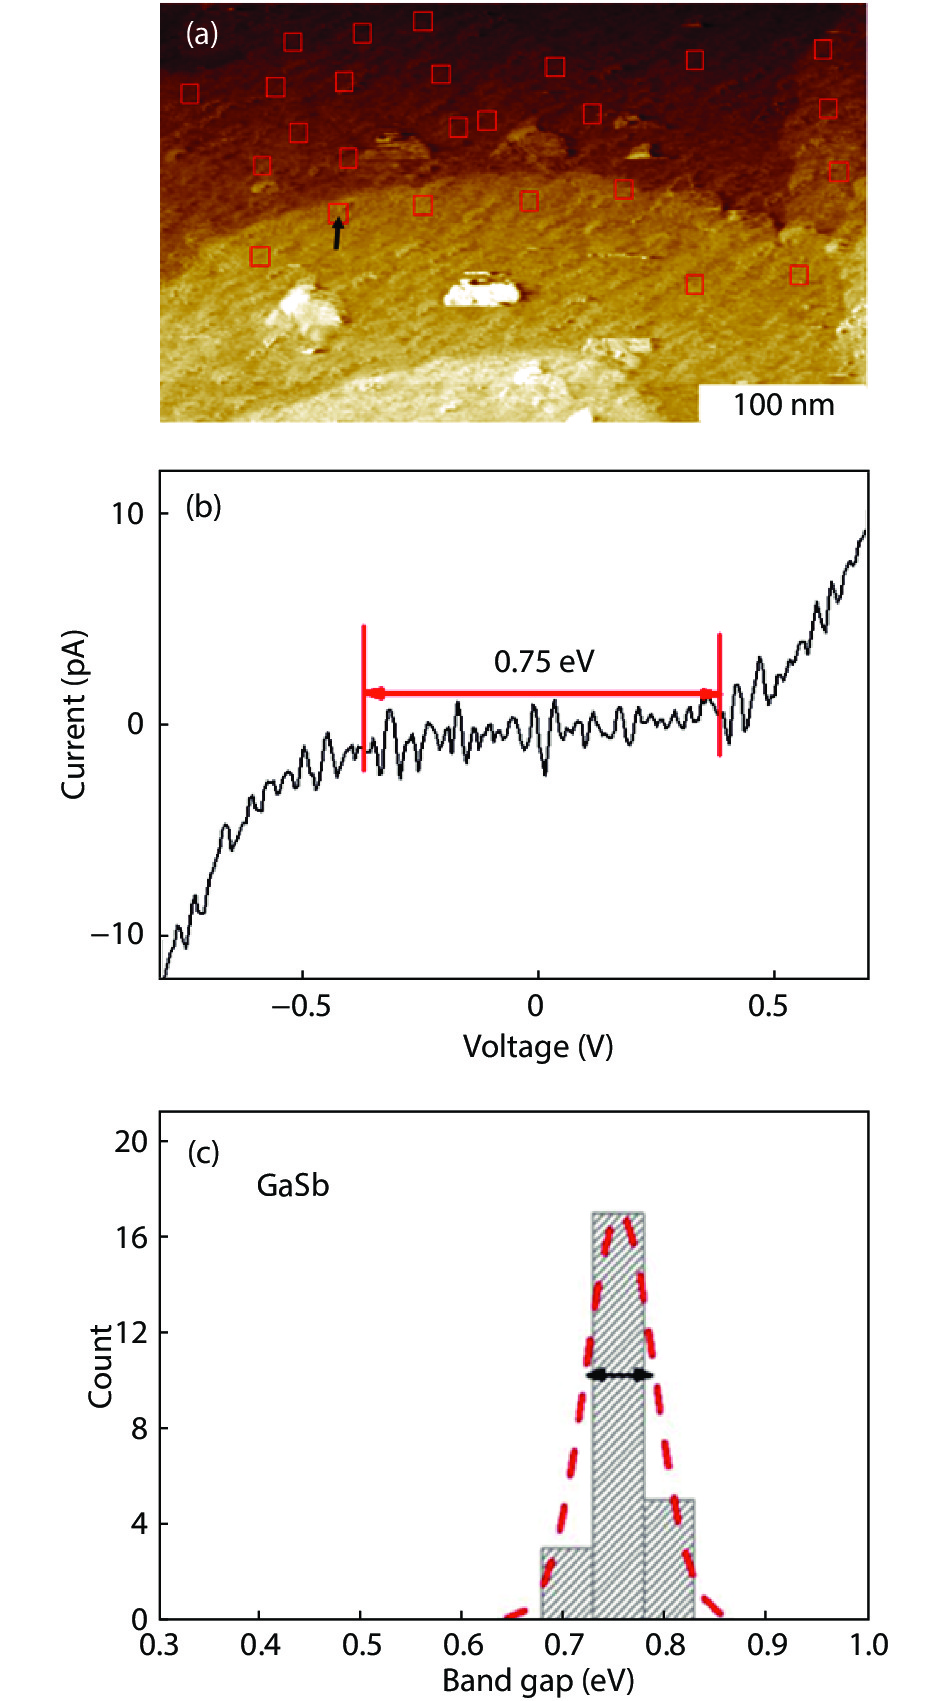 (Color online) (a) The STM image of the GaSb buffer with the indication of the positions of the STS measurements. The arrow designates the position of the I–V curve shown in (b), which is a typical I–V spectrum of GaSb indicating that the current plateau is approximately equal to the band gap of GaSb. (c) The bar graph on the energy distribution of band gaps based on all measured positions in (a).